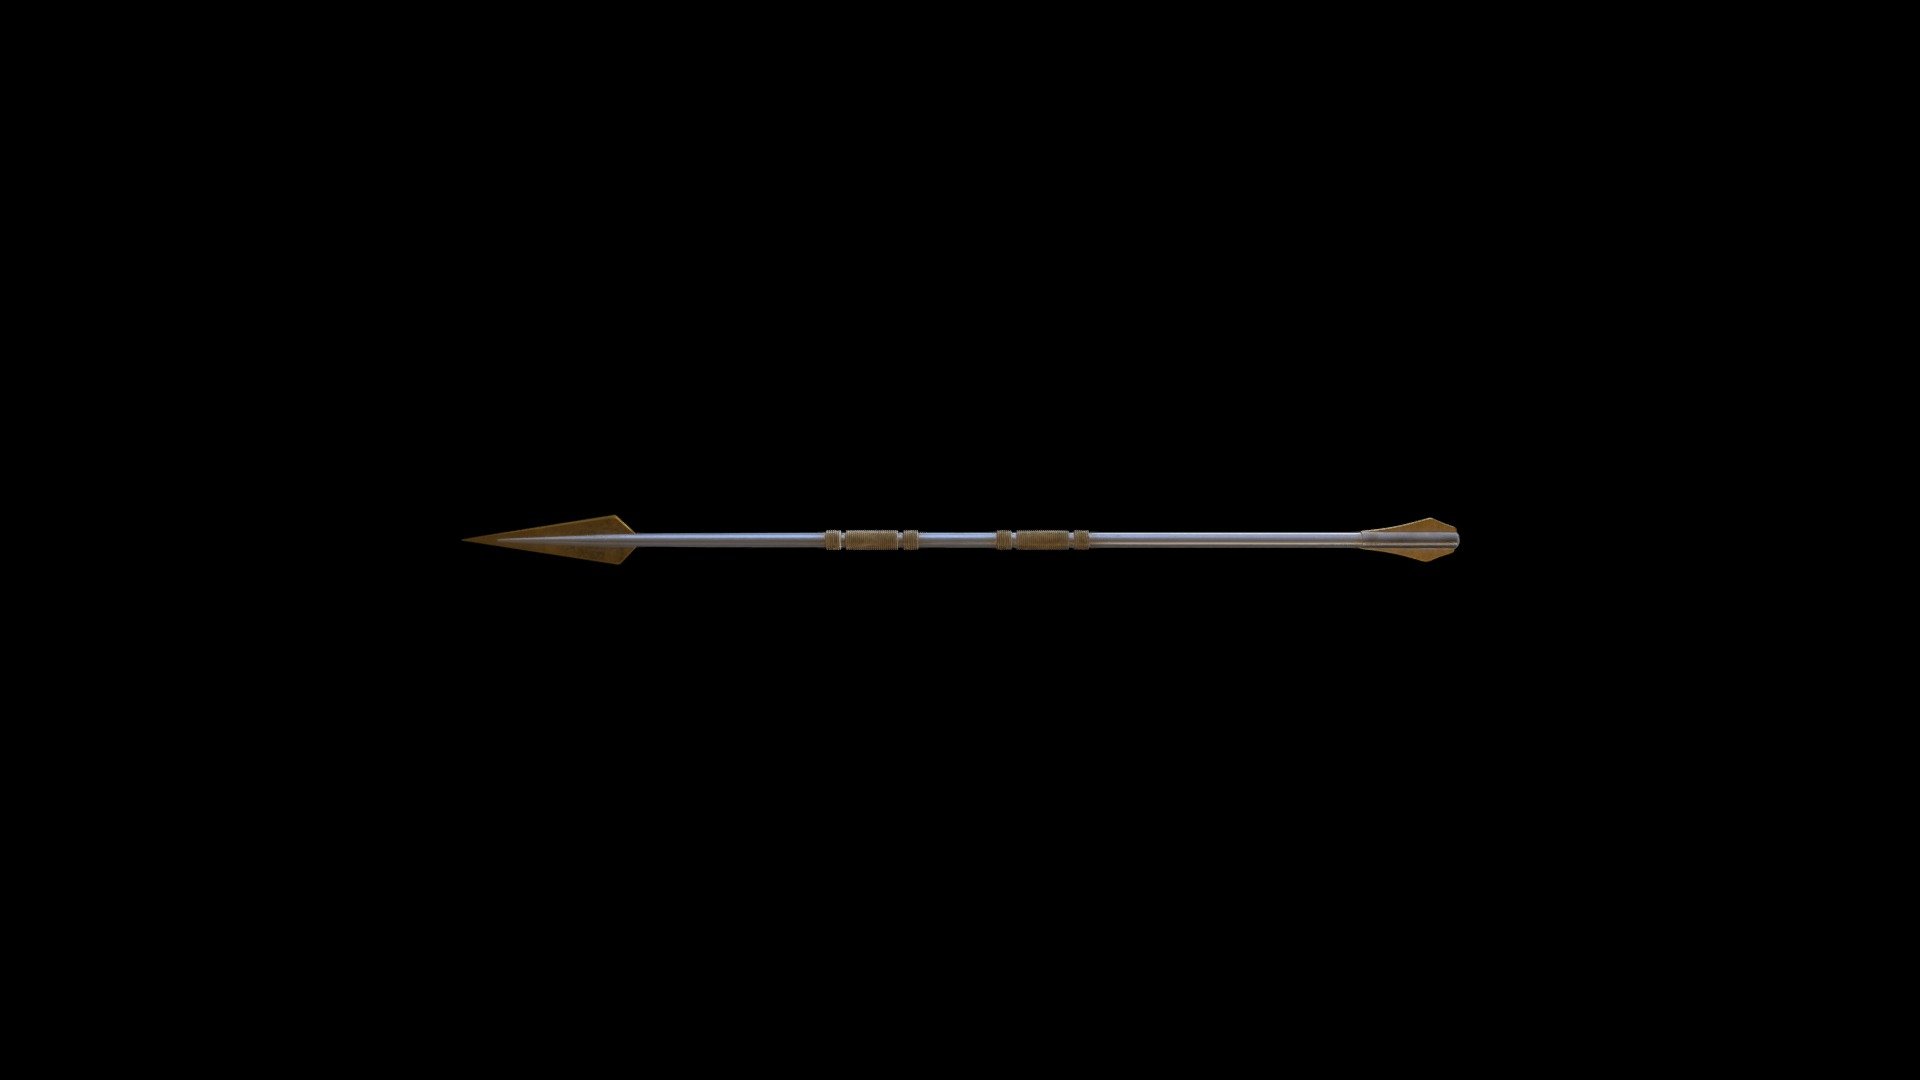 This is the Okoye Spear from the Inktober list I made. The model is made in Maya and the textures in Substance Painter. You can watch other props from my Inktober list of Marvel there: https://www.artstation.com/nahiadelacalle/albums/1772639 - Okoye Spear - 3D model by Nahia de la calle (@nahiadelacalle) 3d model